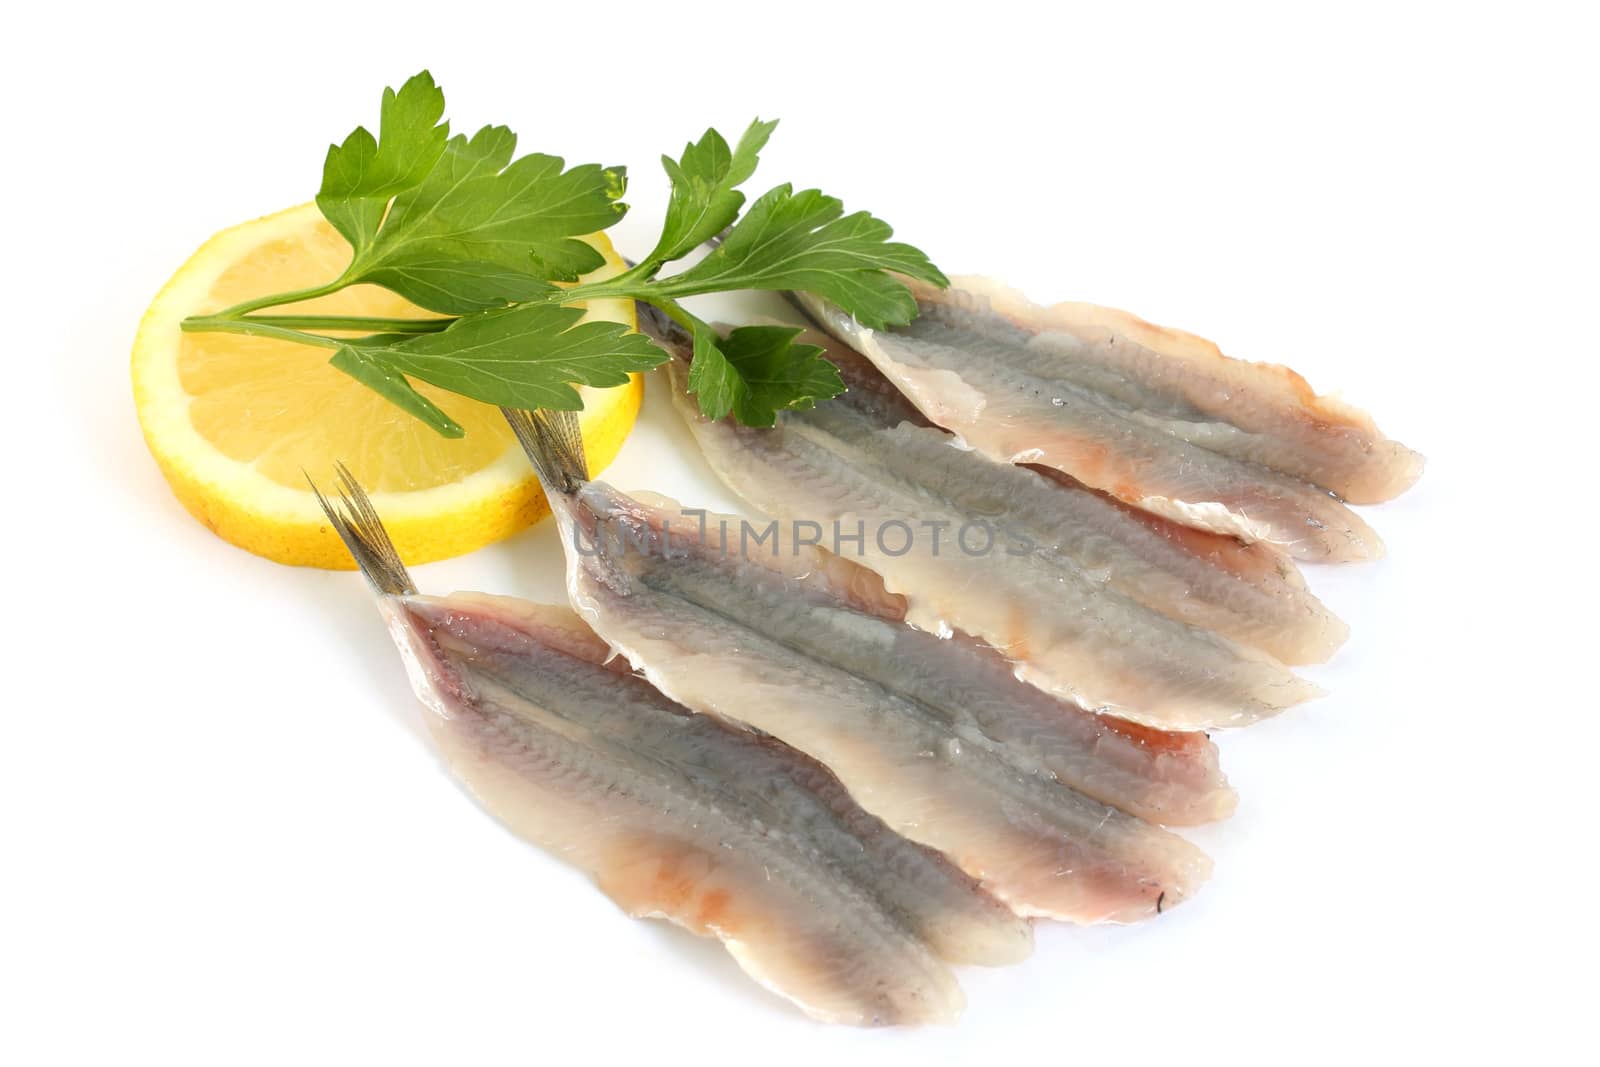 Anchovy fillets with parsley and lemon